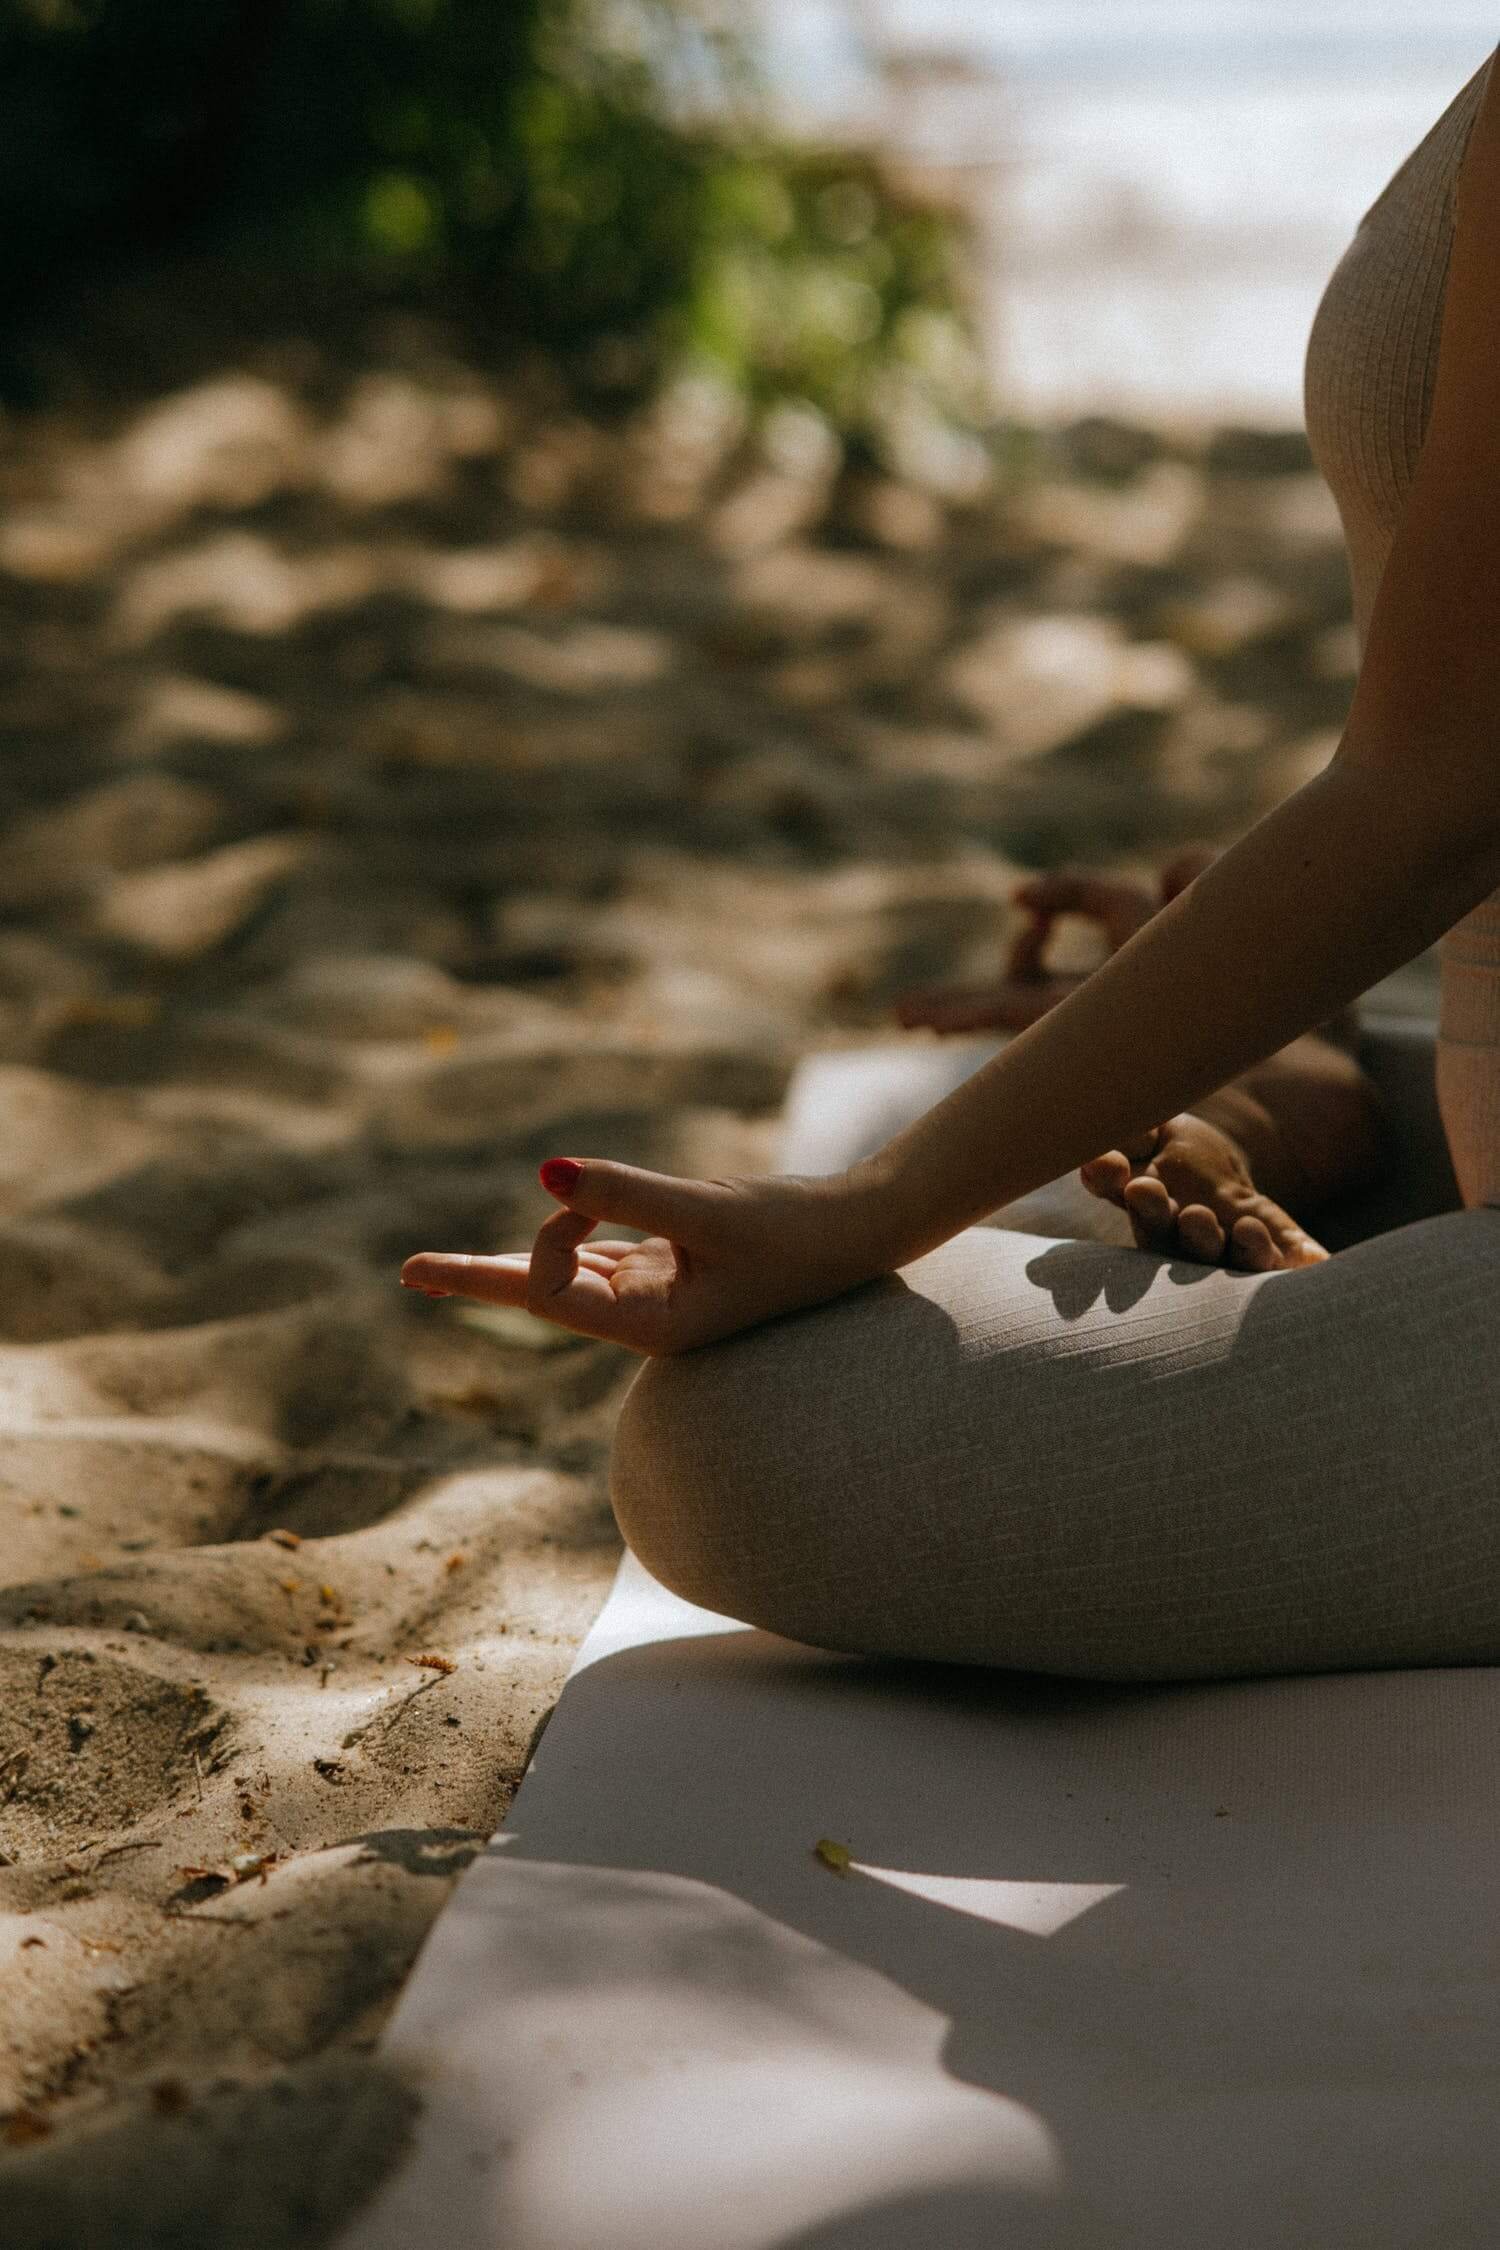 Women's bare feet connection on yoga cushions - Stock Image - F017